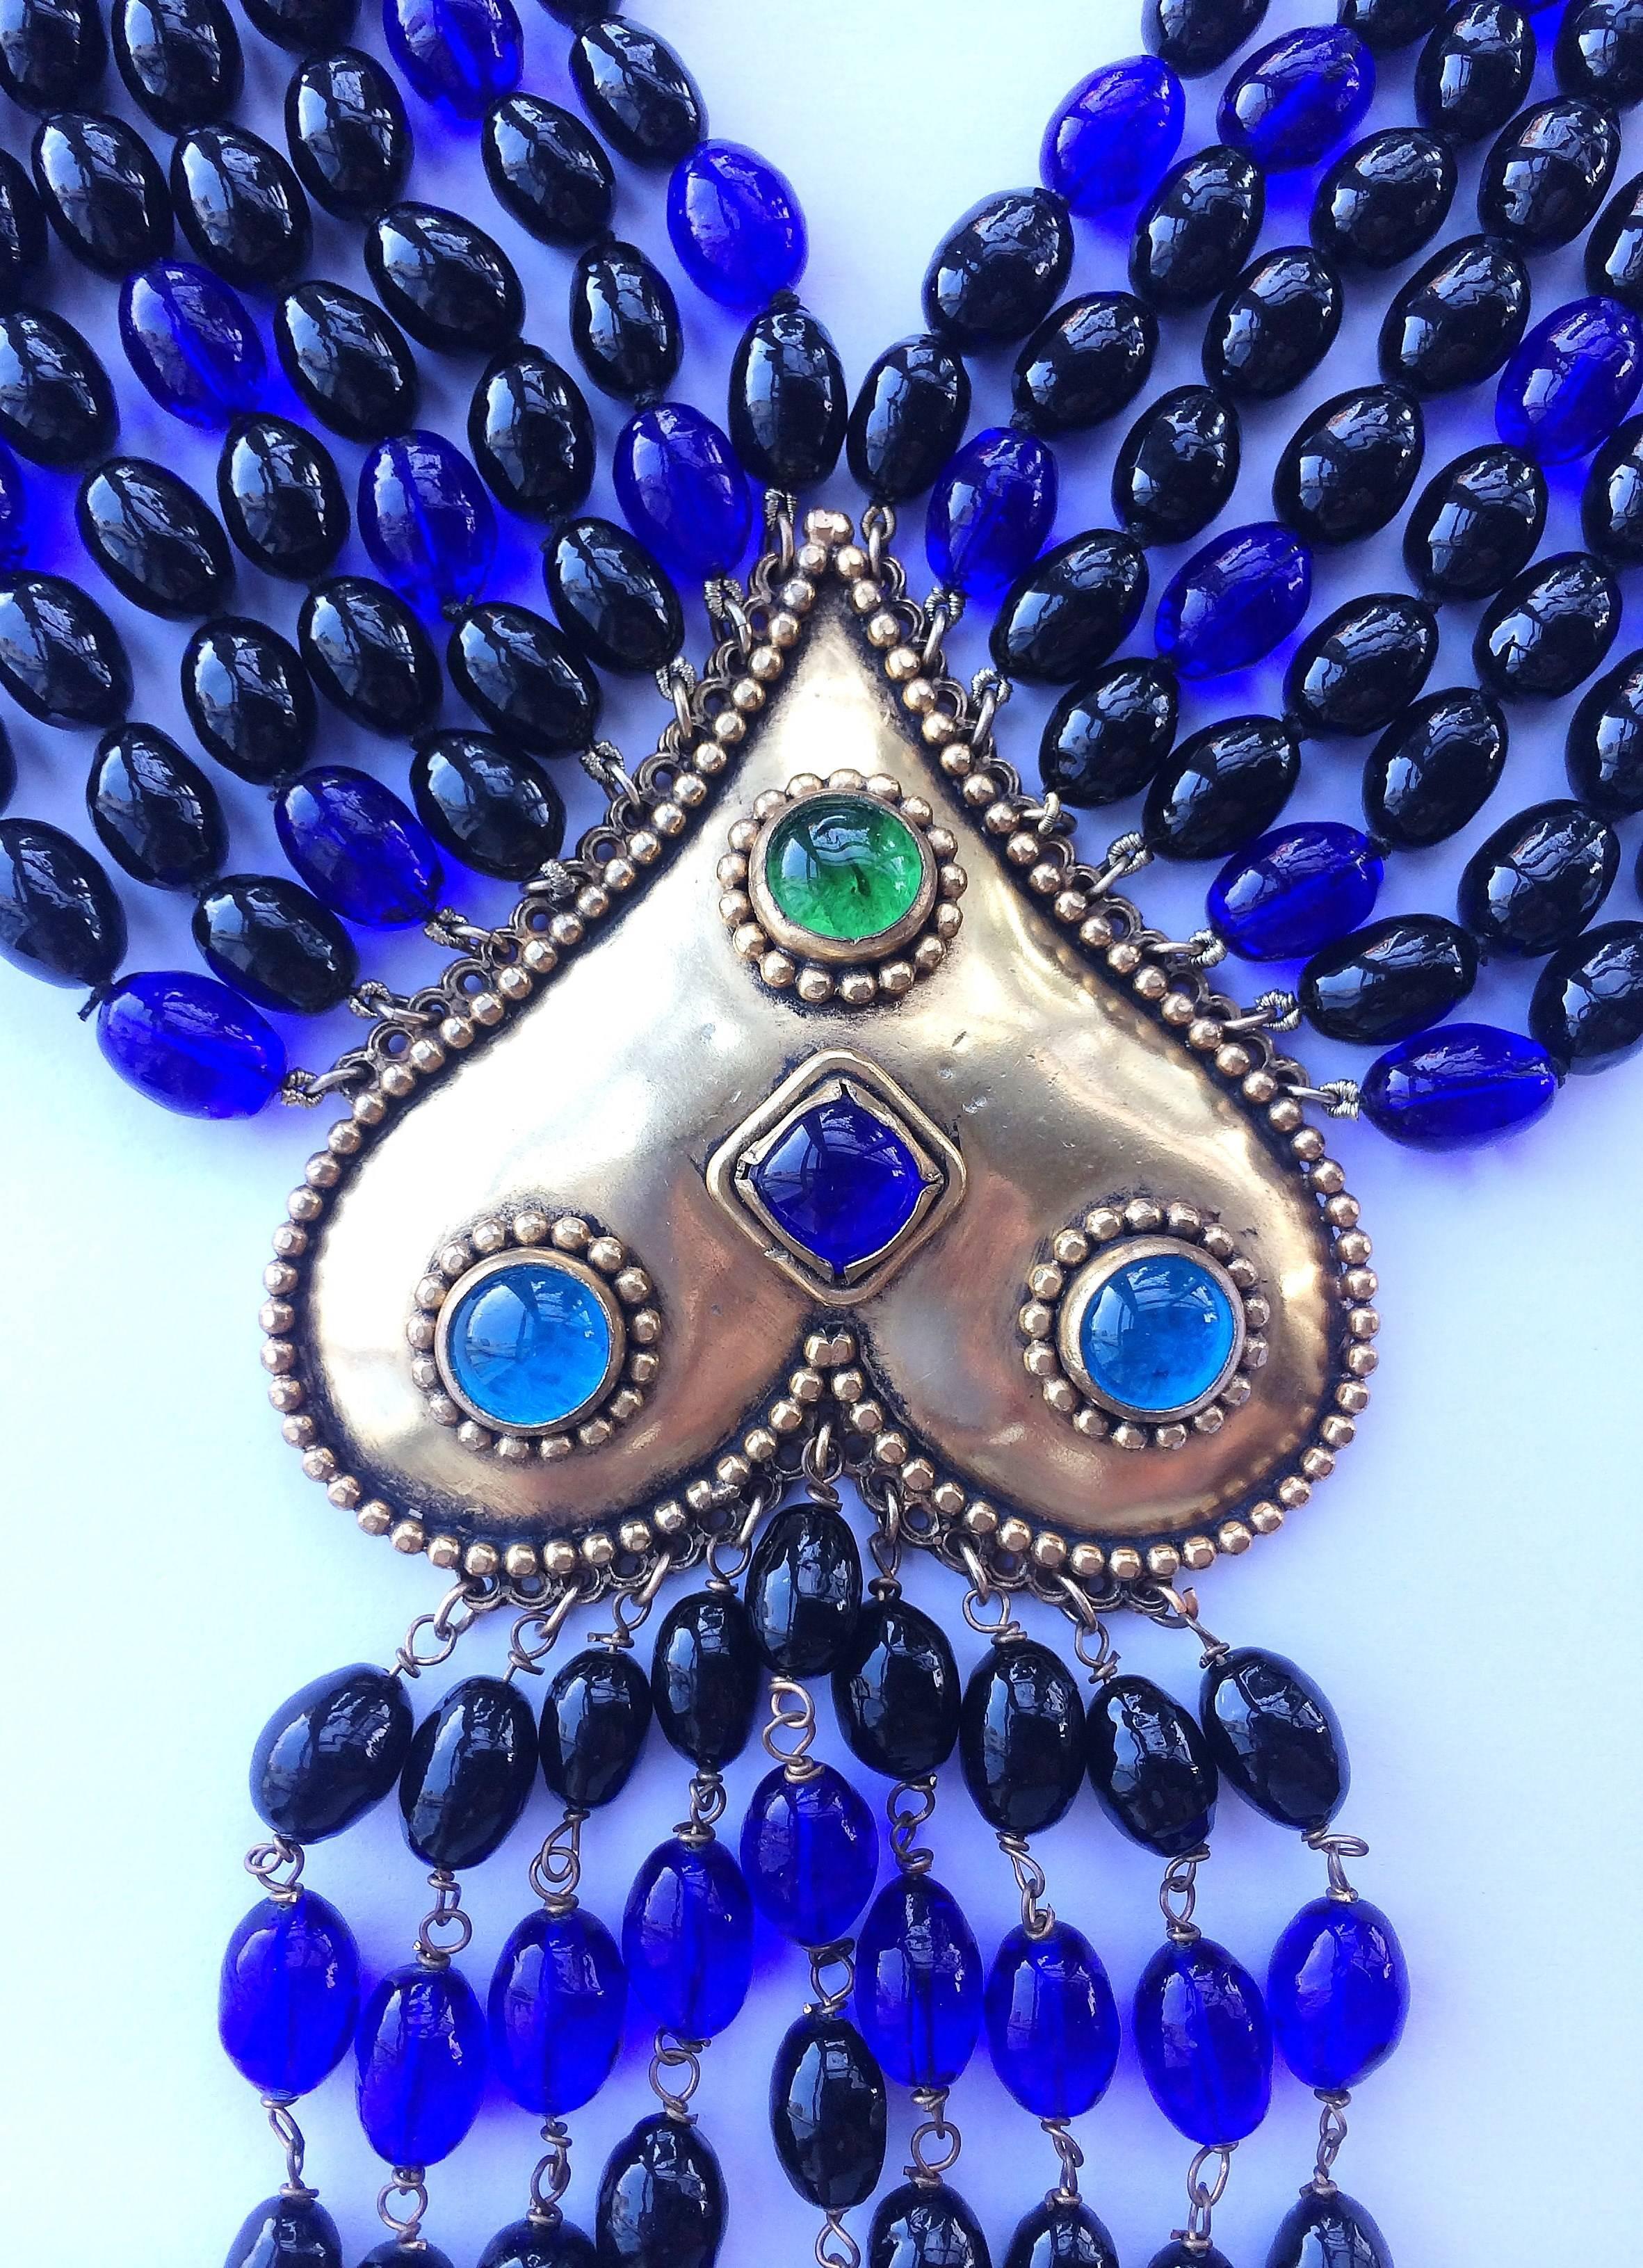 Opulent and magnificent blue and black poured glass sautoir style necklace, with large gilt and jewelled 'heart' centrepiece, by Isabel Canovas from the 1980s. Aqua,sapphire and peridot poured glass stones adorn the burnished gilt heart , which is